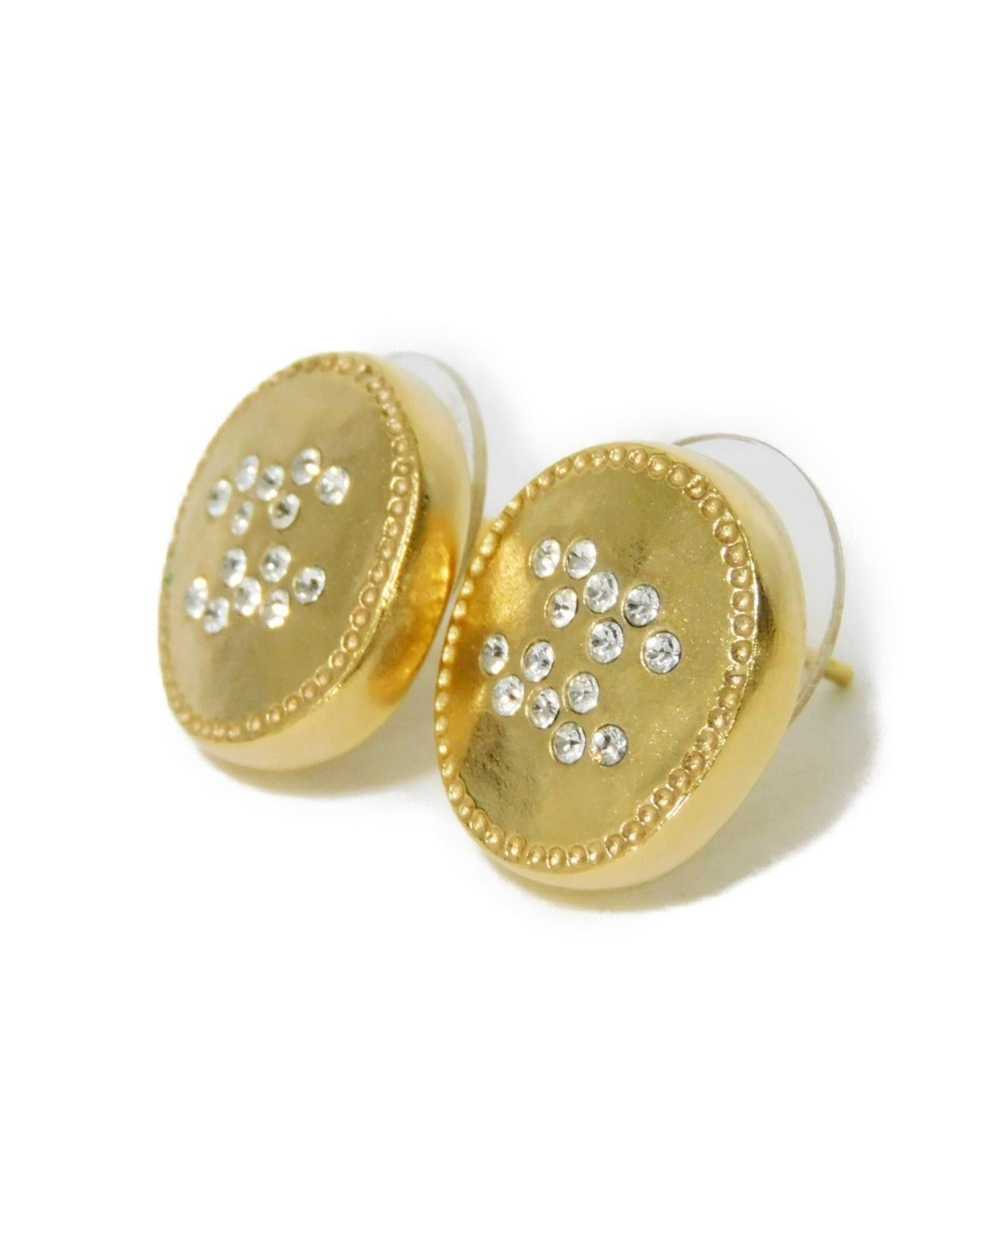 Chanel Champagne Gold Coco Button Earrings - image 2